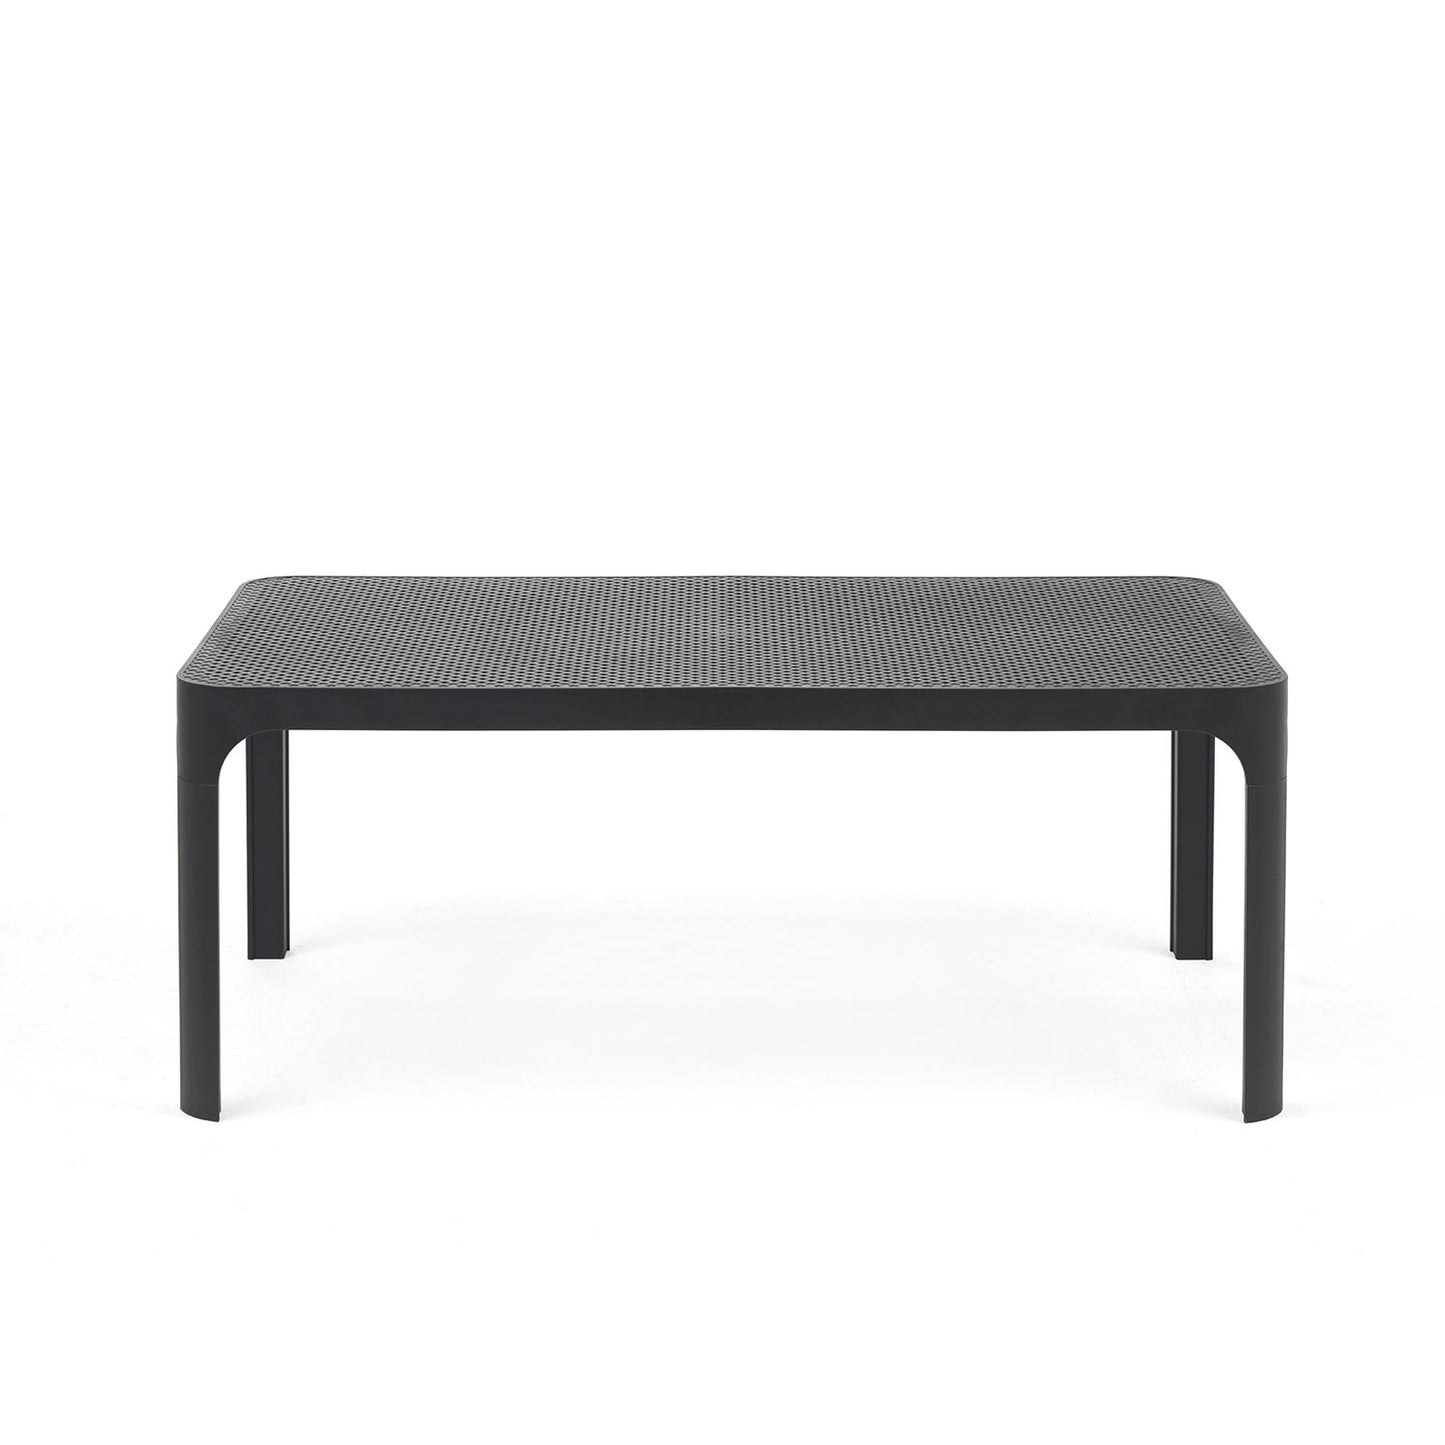 Net Table 100cm Garden Table By Nardi - Anthracite